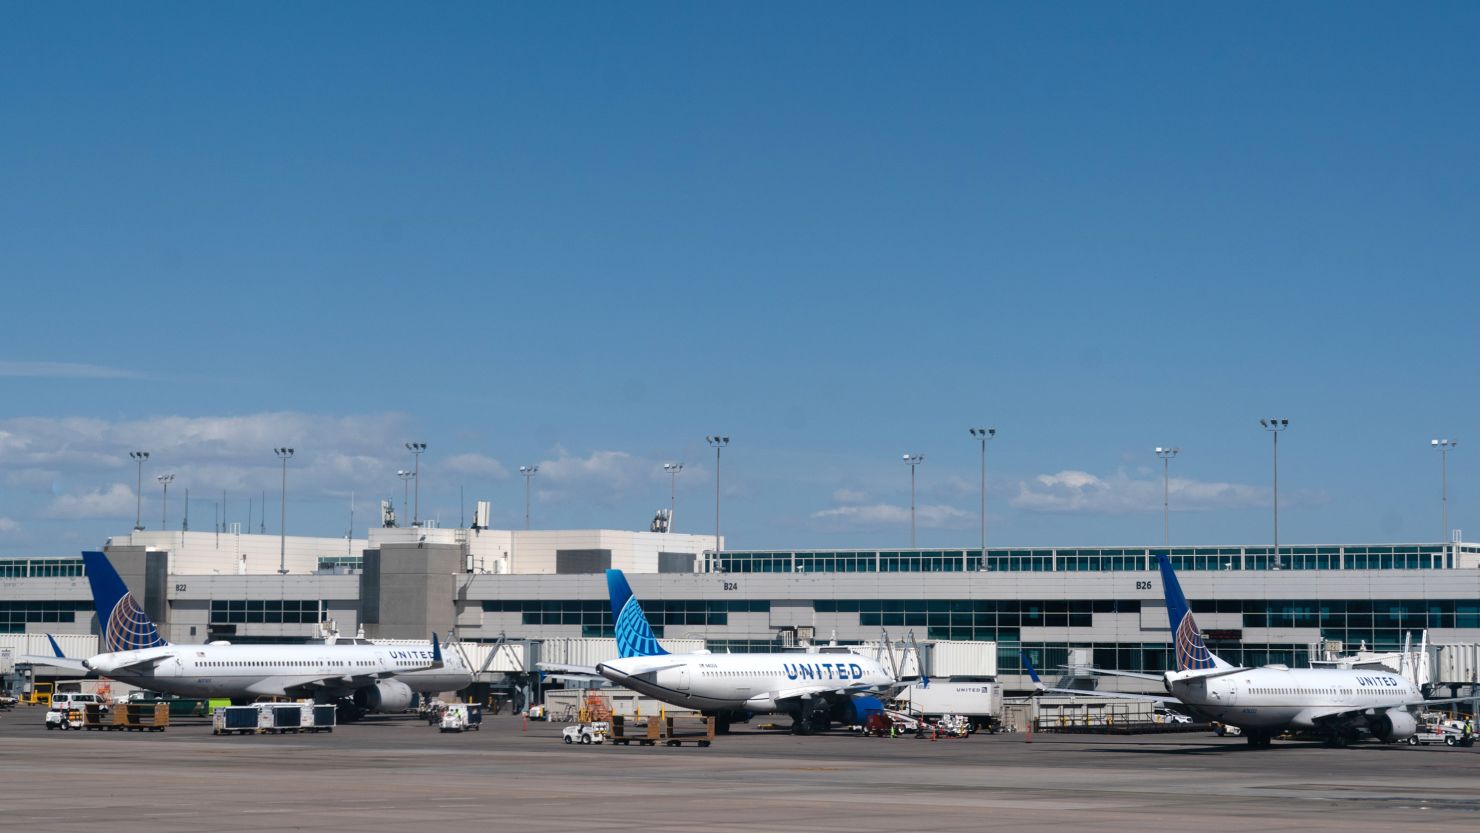 United Airlines Holdings Inc. planes parked at gates at Denver International Airport in Denver, Colorado, U.S., on Thursday, April 8, 2021. U.S. airlines are bringing back more pilots as they prepare for an expected travel rebound. 